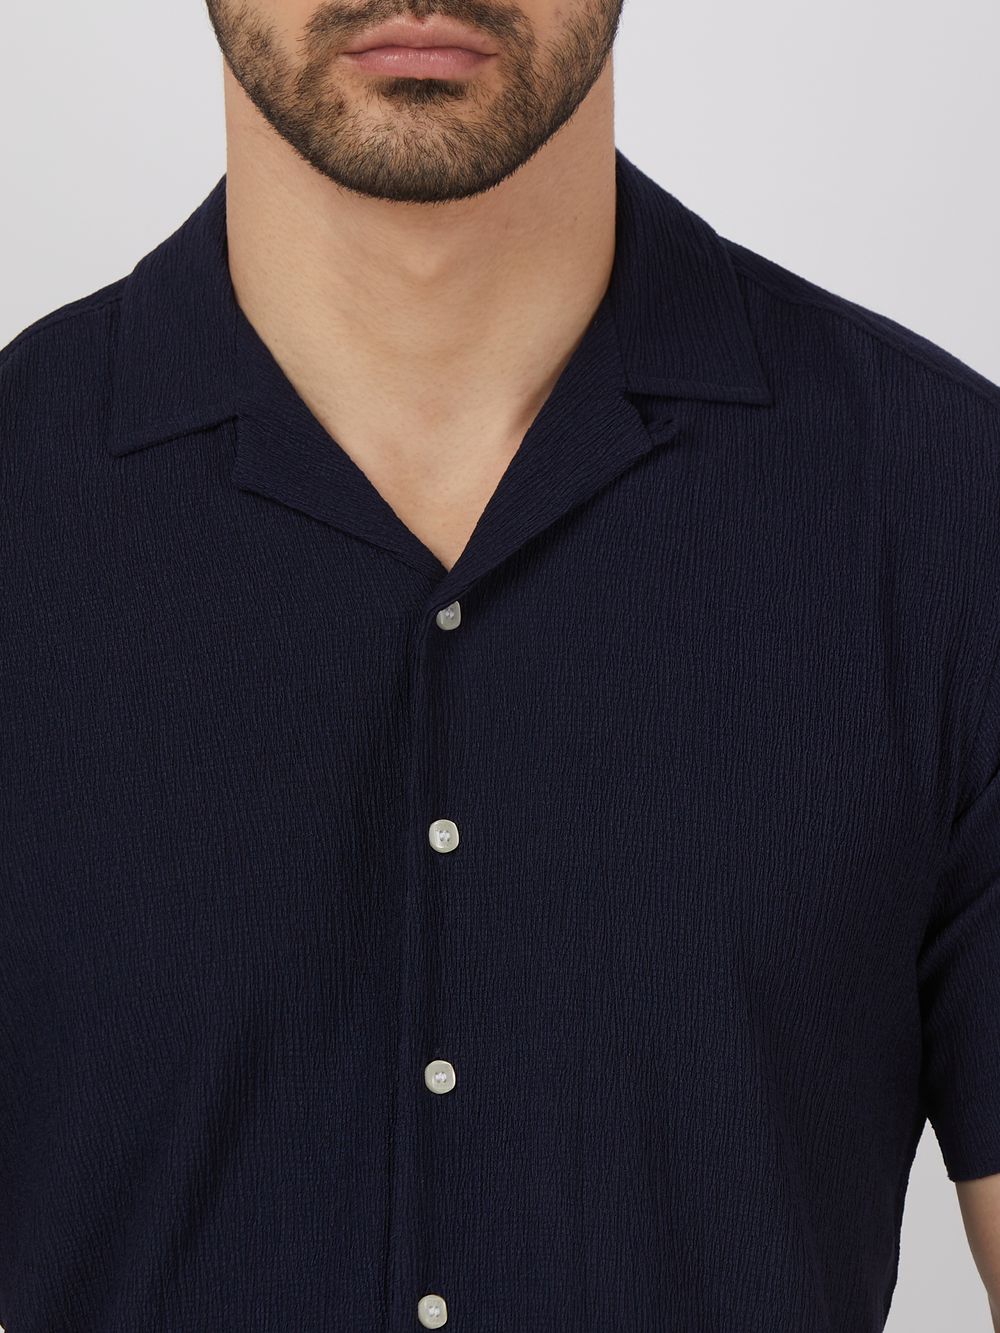 Navy Textured Plain Relaxed Fit Casual Shirt